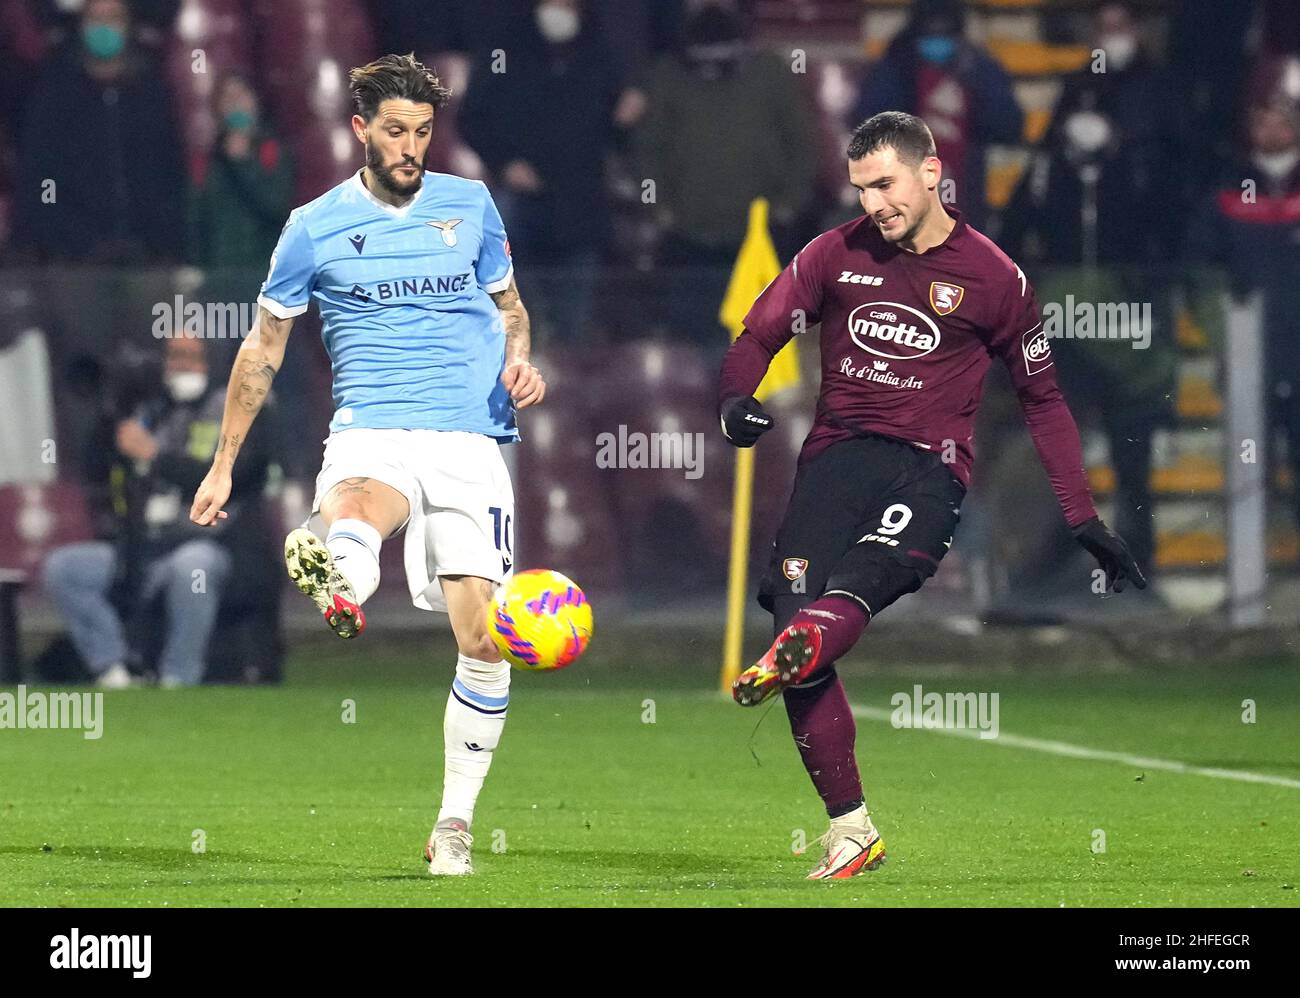 SALERNO, ITALY - JANUARY 15: Federico Bonazzoli of US Salernitana competes for the ball with Luis Alberto of SS Lazio ,during the Serie A match between US Salernitana and SS Lazio at Stadio Arechi on January 16, 2022 in Salerno, Italy. (Photo by MB Media) Stock Photo